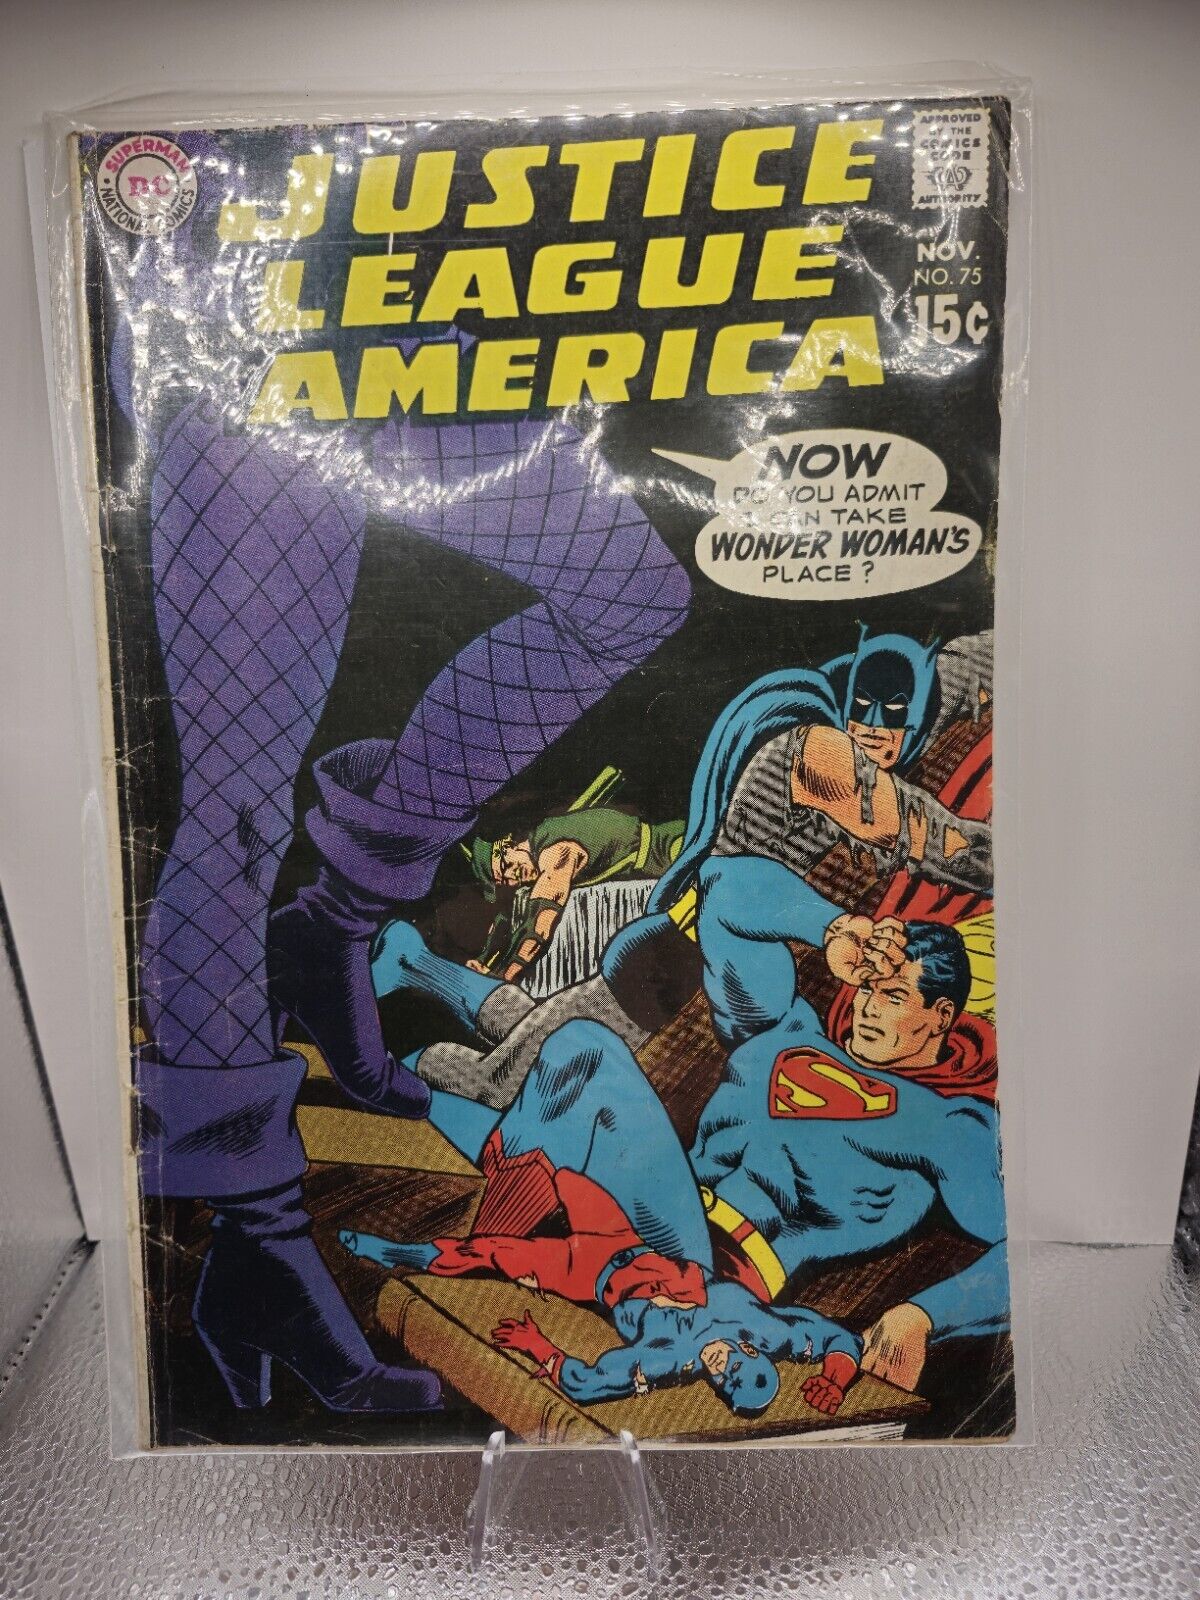 DC JUSTICE LEAGUE OF AMERICA #75 1969 Silver Age Black Canary joins Key Issue